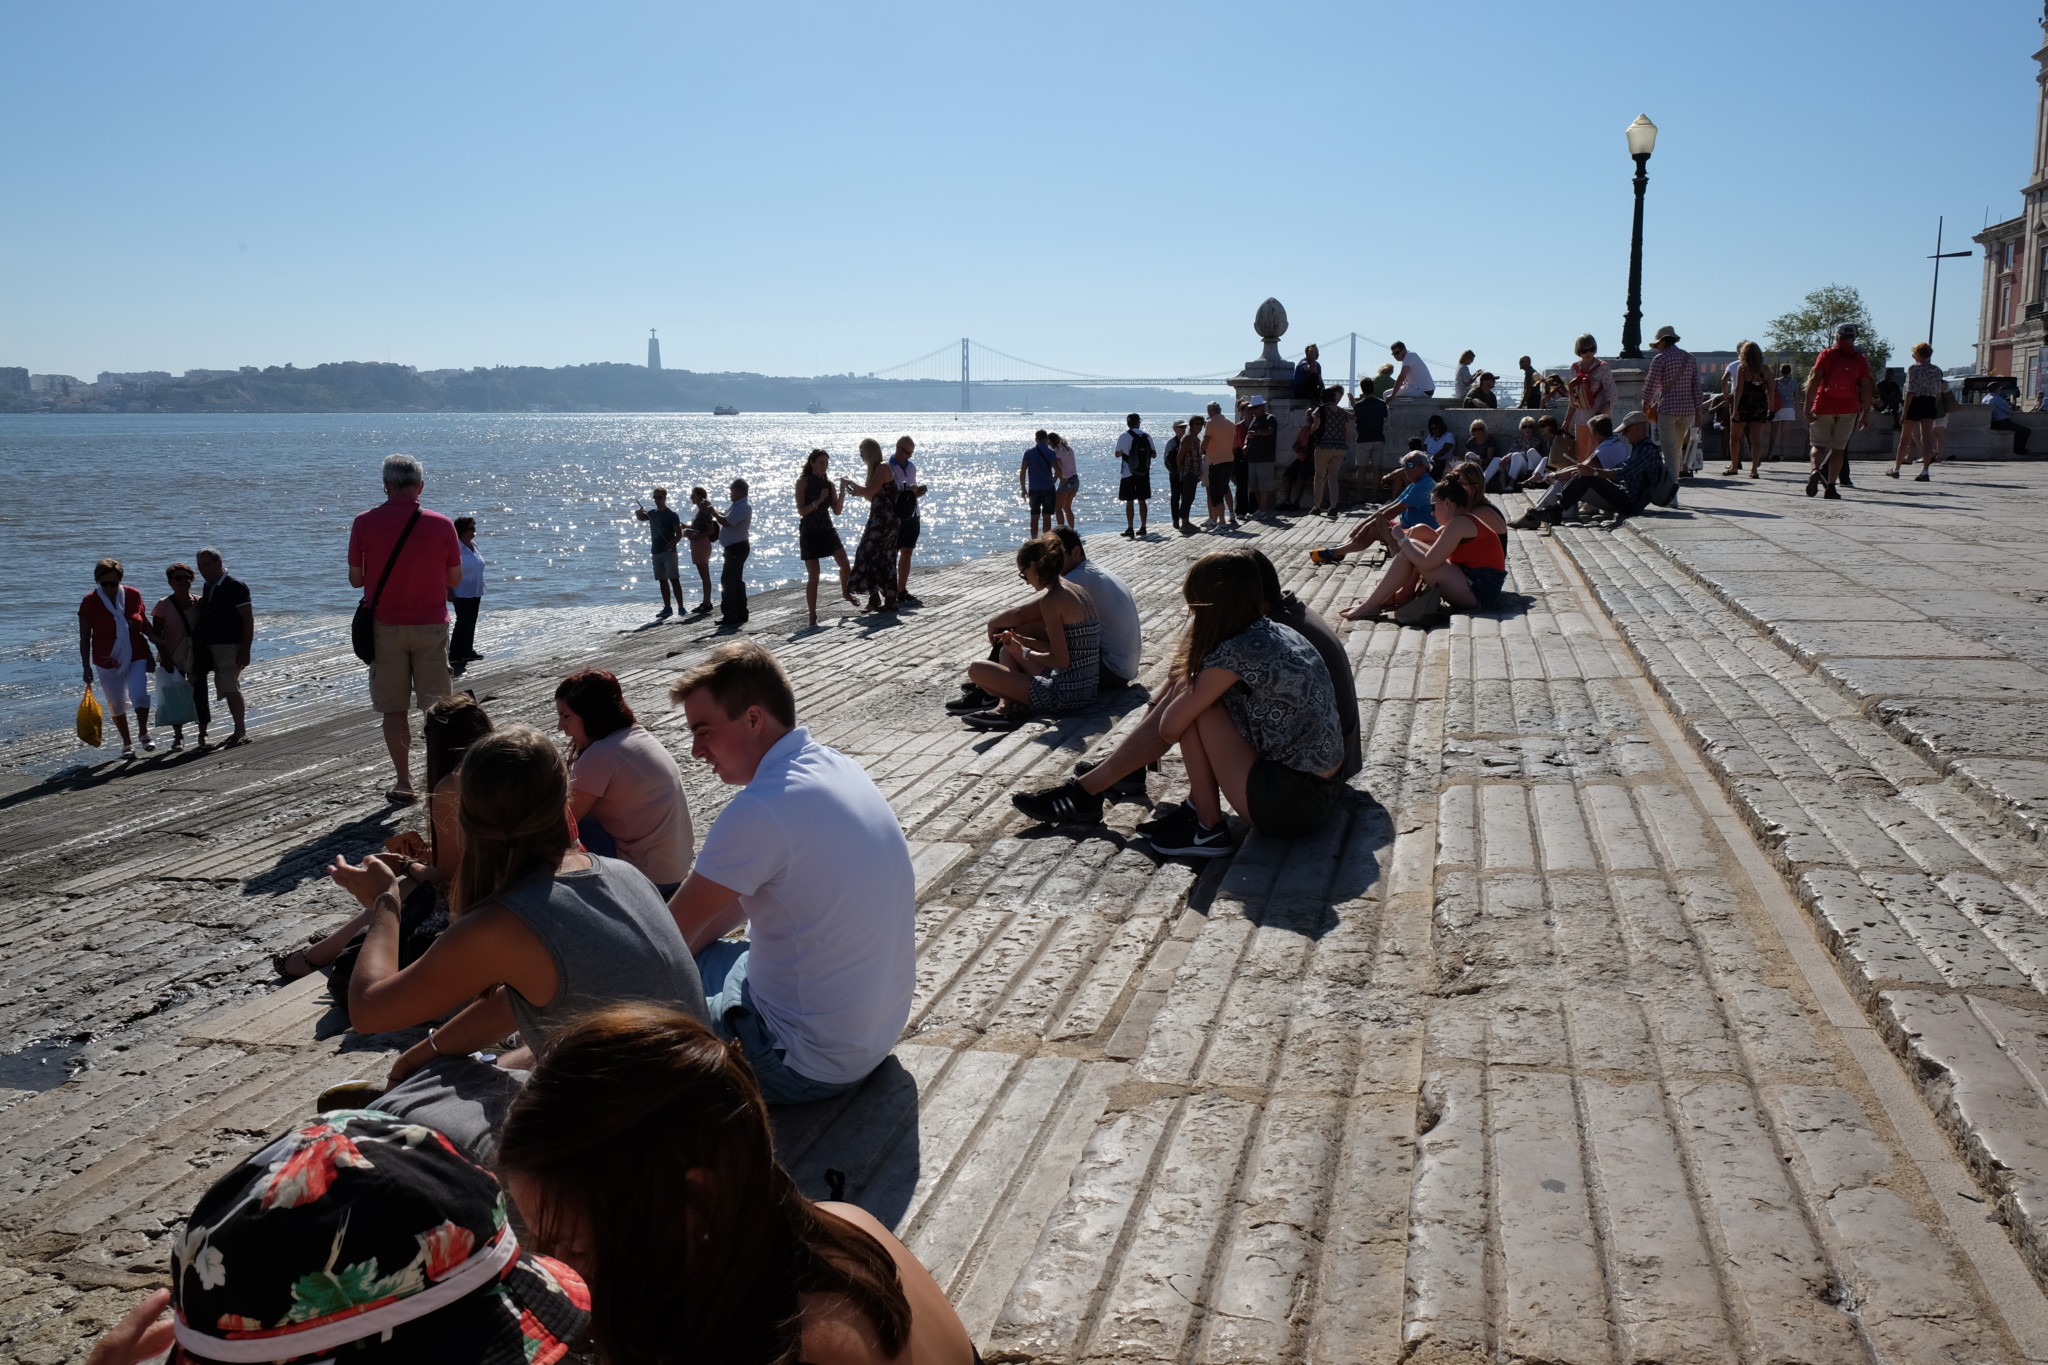 Enjoying the late afternoon sun by the River Tagus